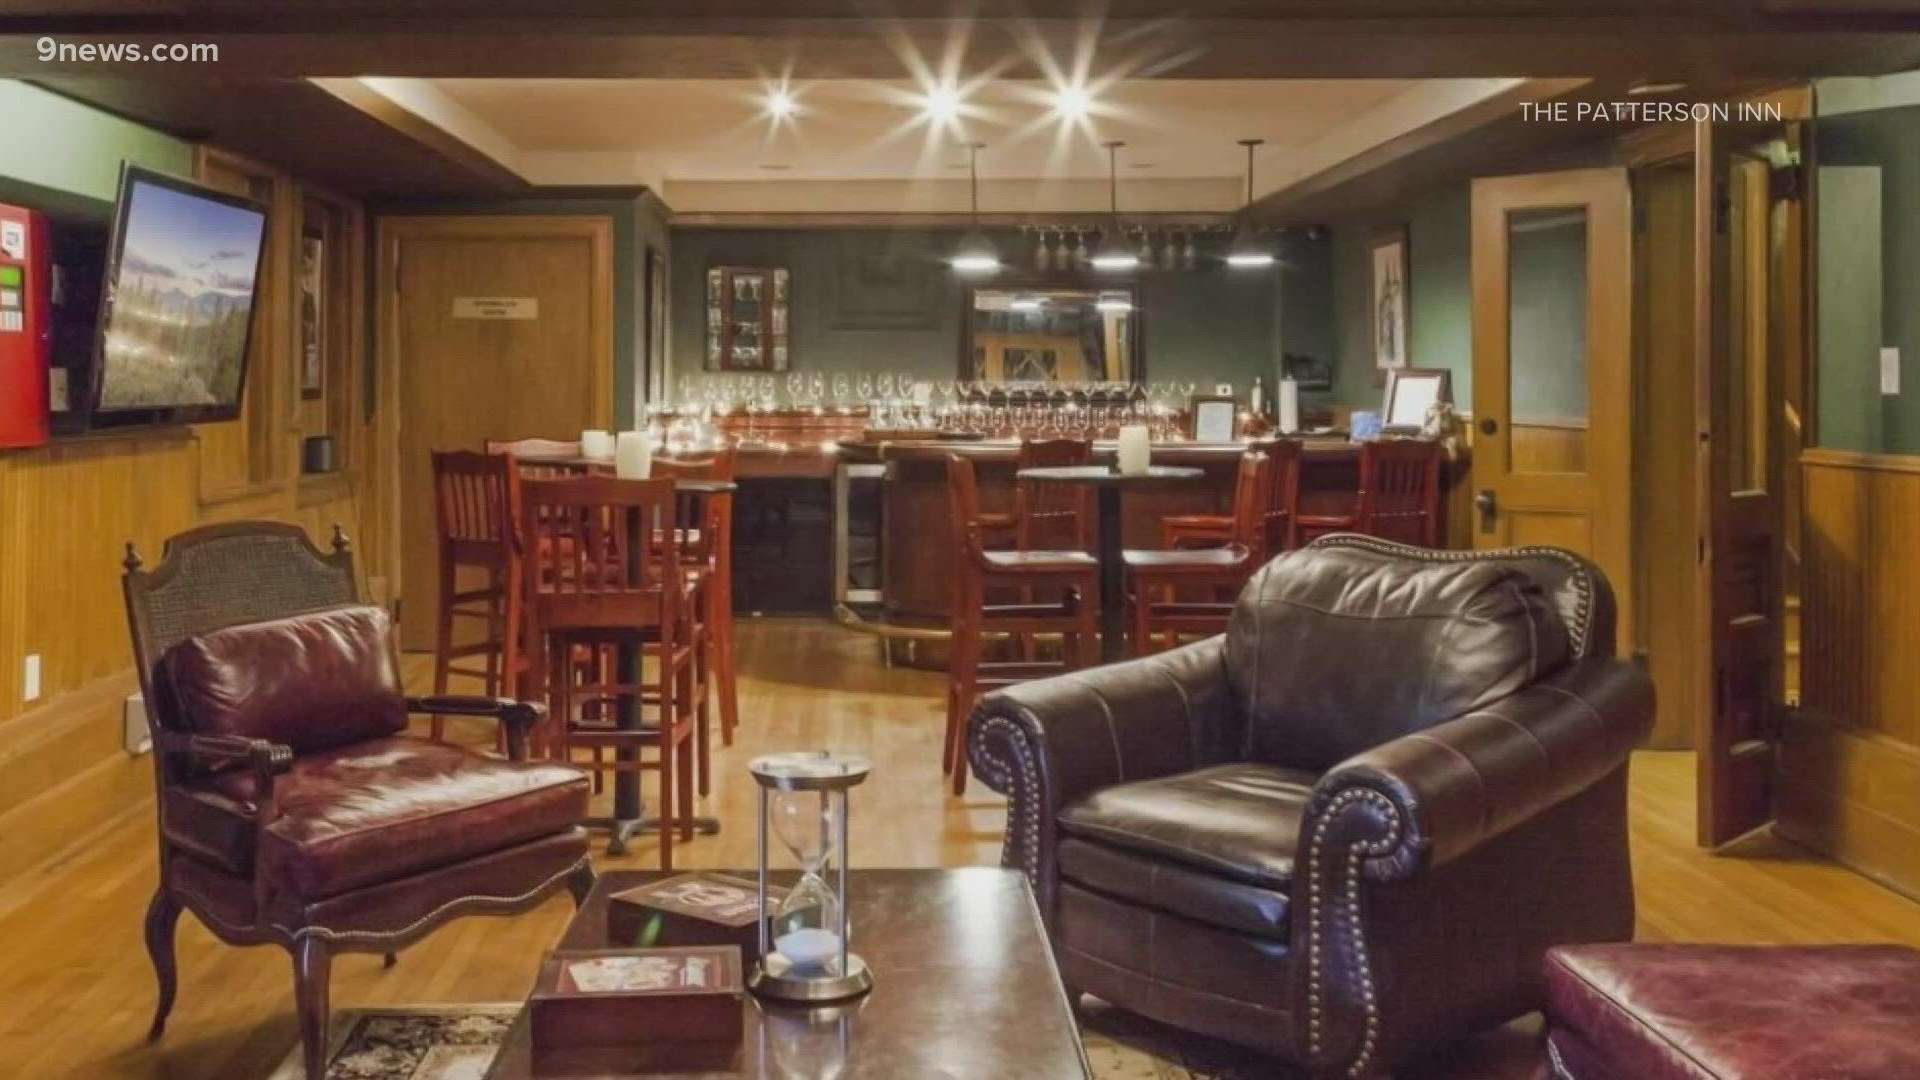 The Patterson Inn can move forward with plans for a smoking lounge. They were the first to apply under Denver's new marijuana hospitality program.